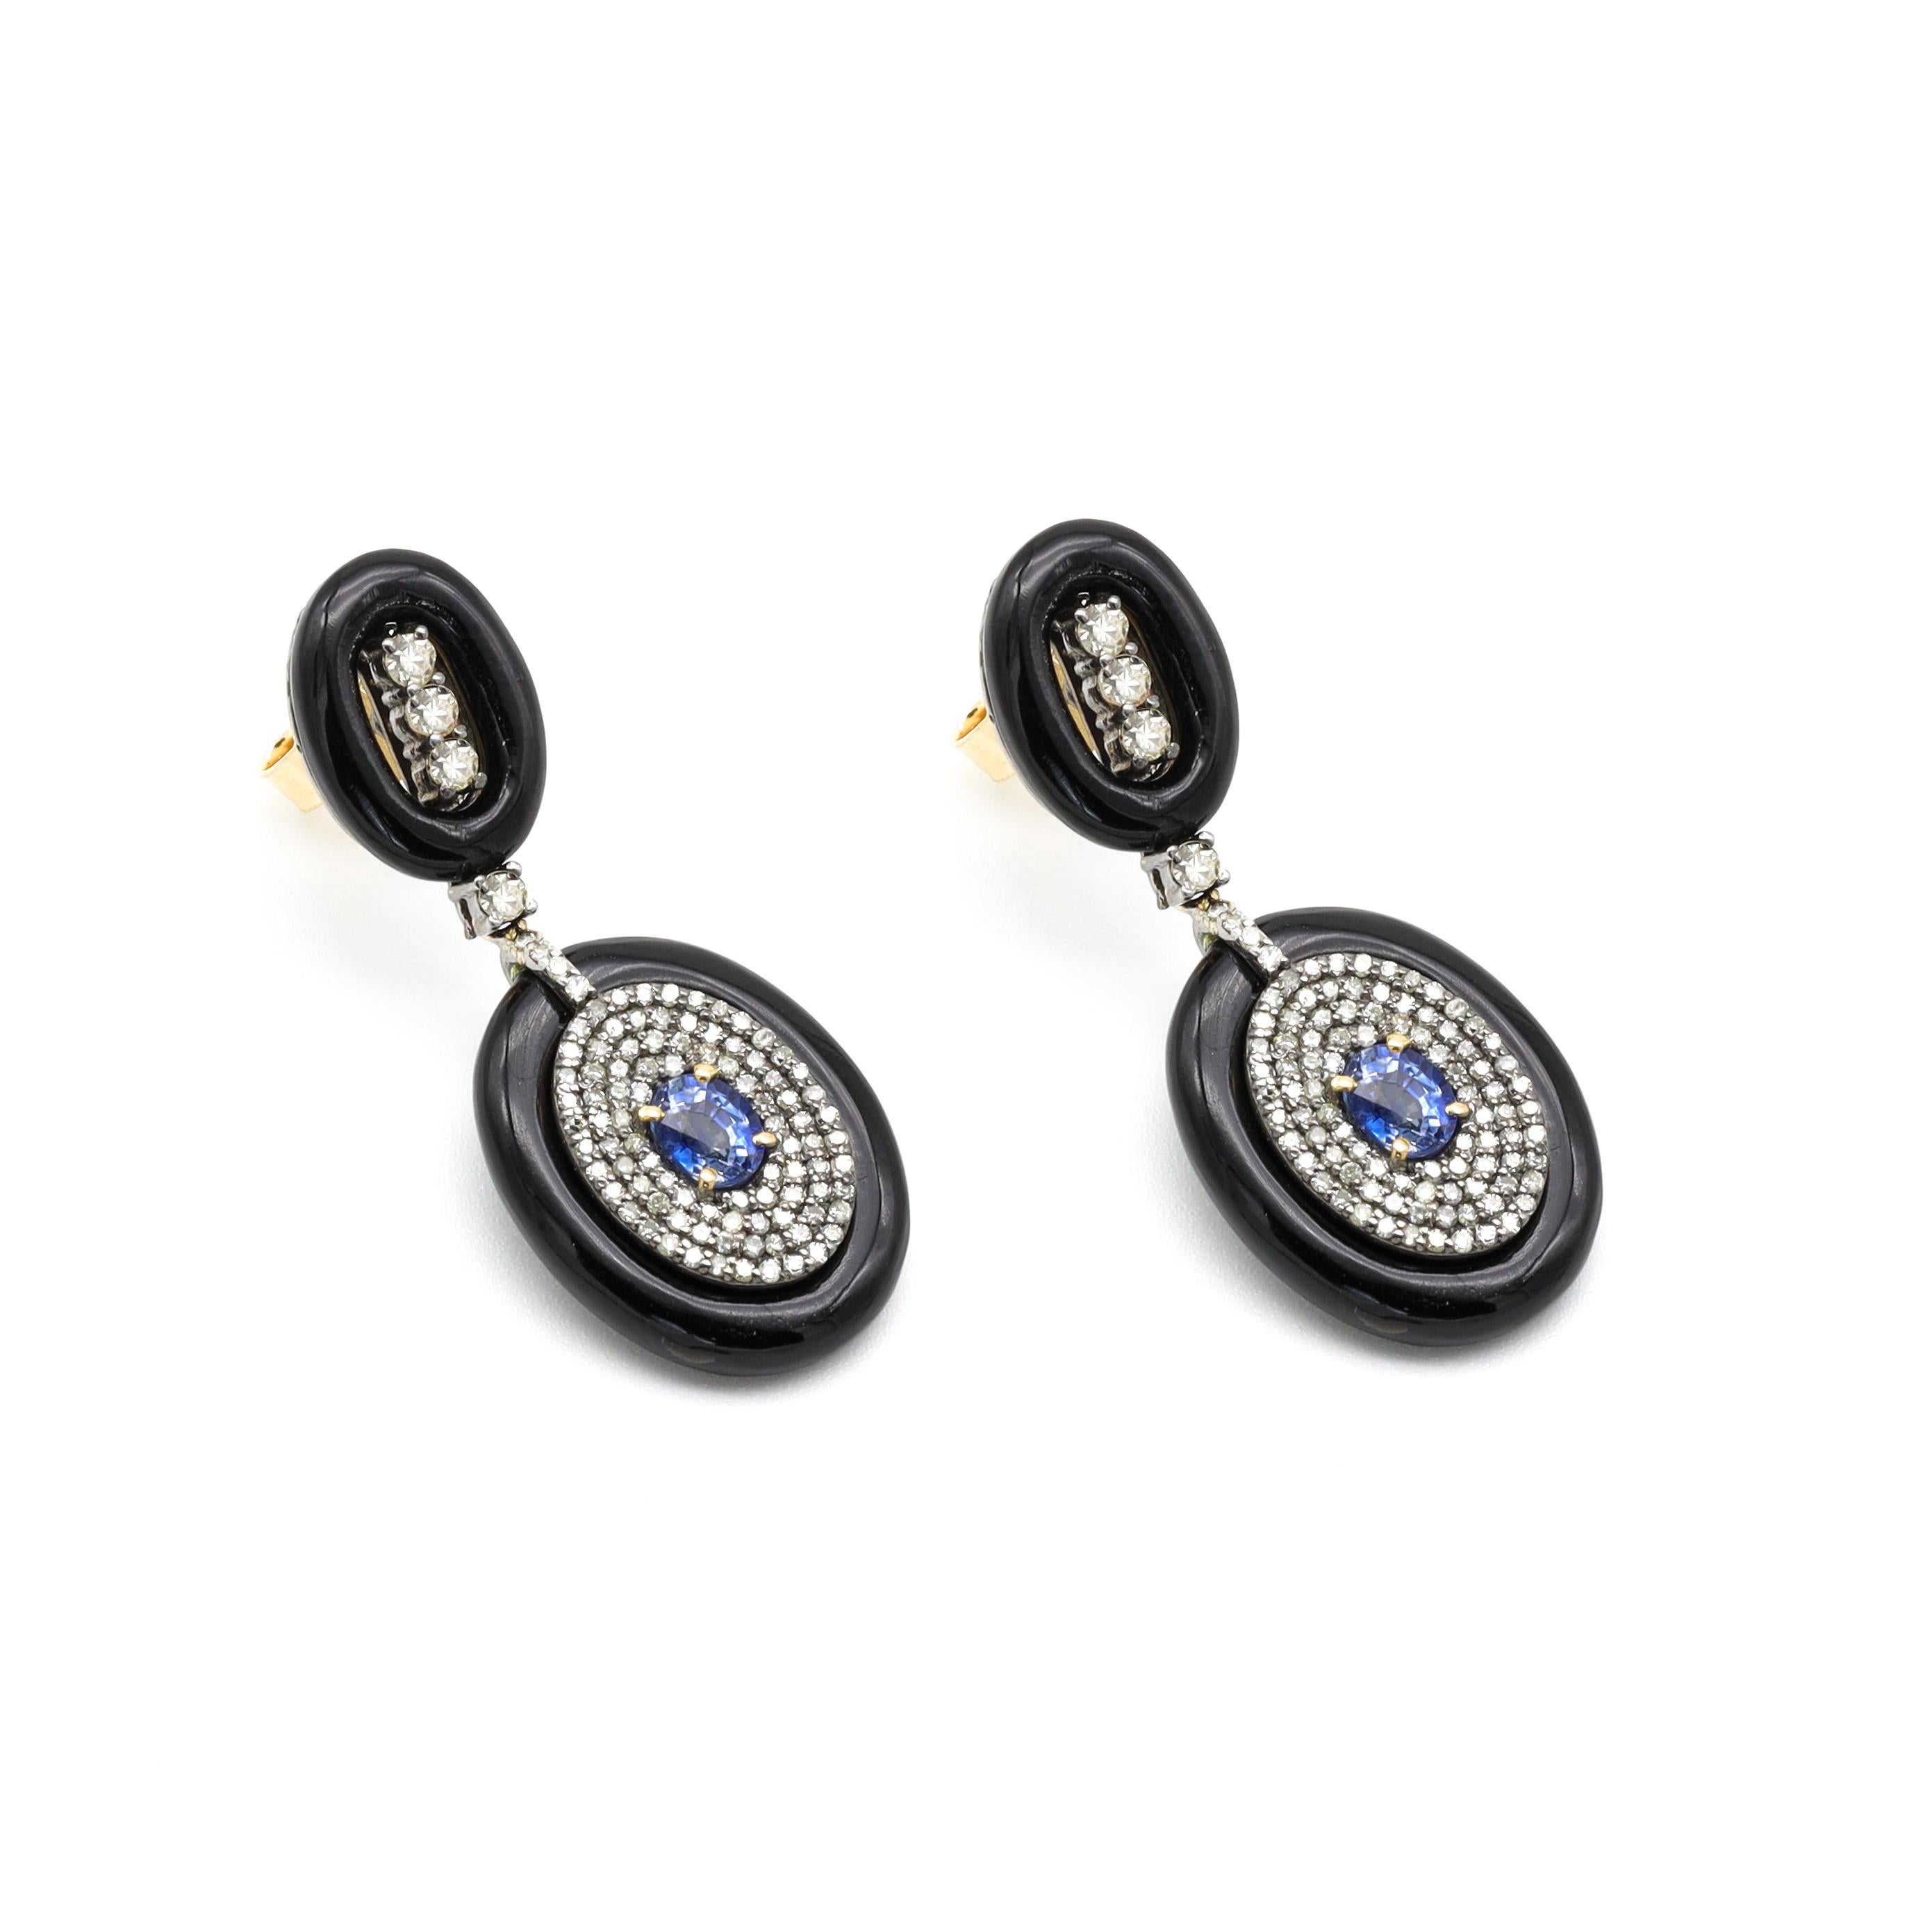 Diamond, Sapphire, and Black Onyx Drop Earrings

This art-deco glorious black onyx, cornflower blue sapphire, and diamond earring pair is exceptional. The oval blue sapphire in the center is gracefully enclosed with three overlapping rows of pave